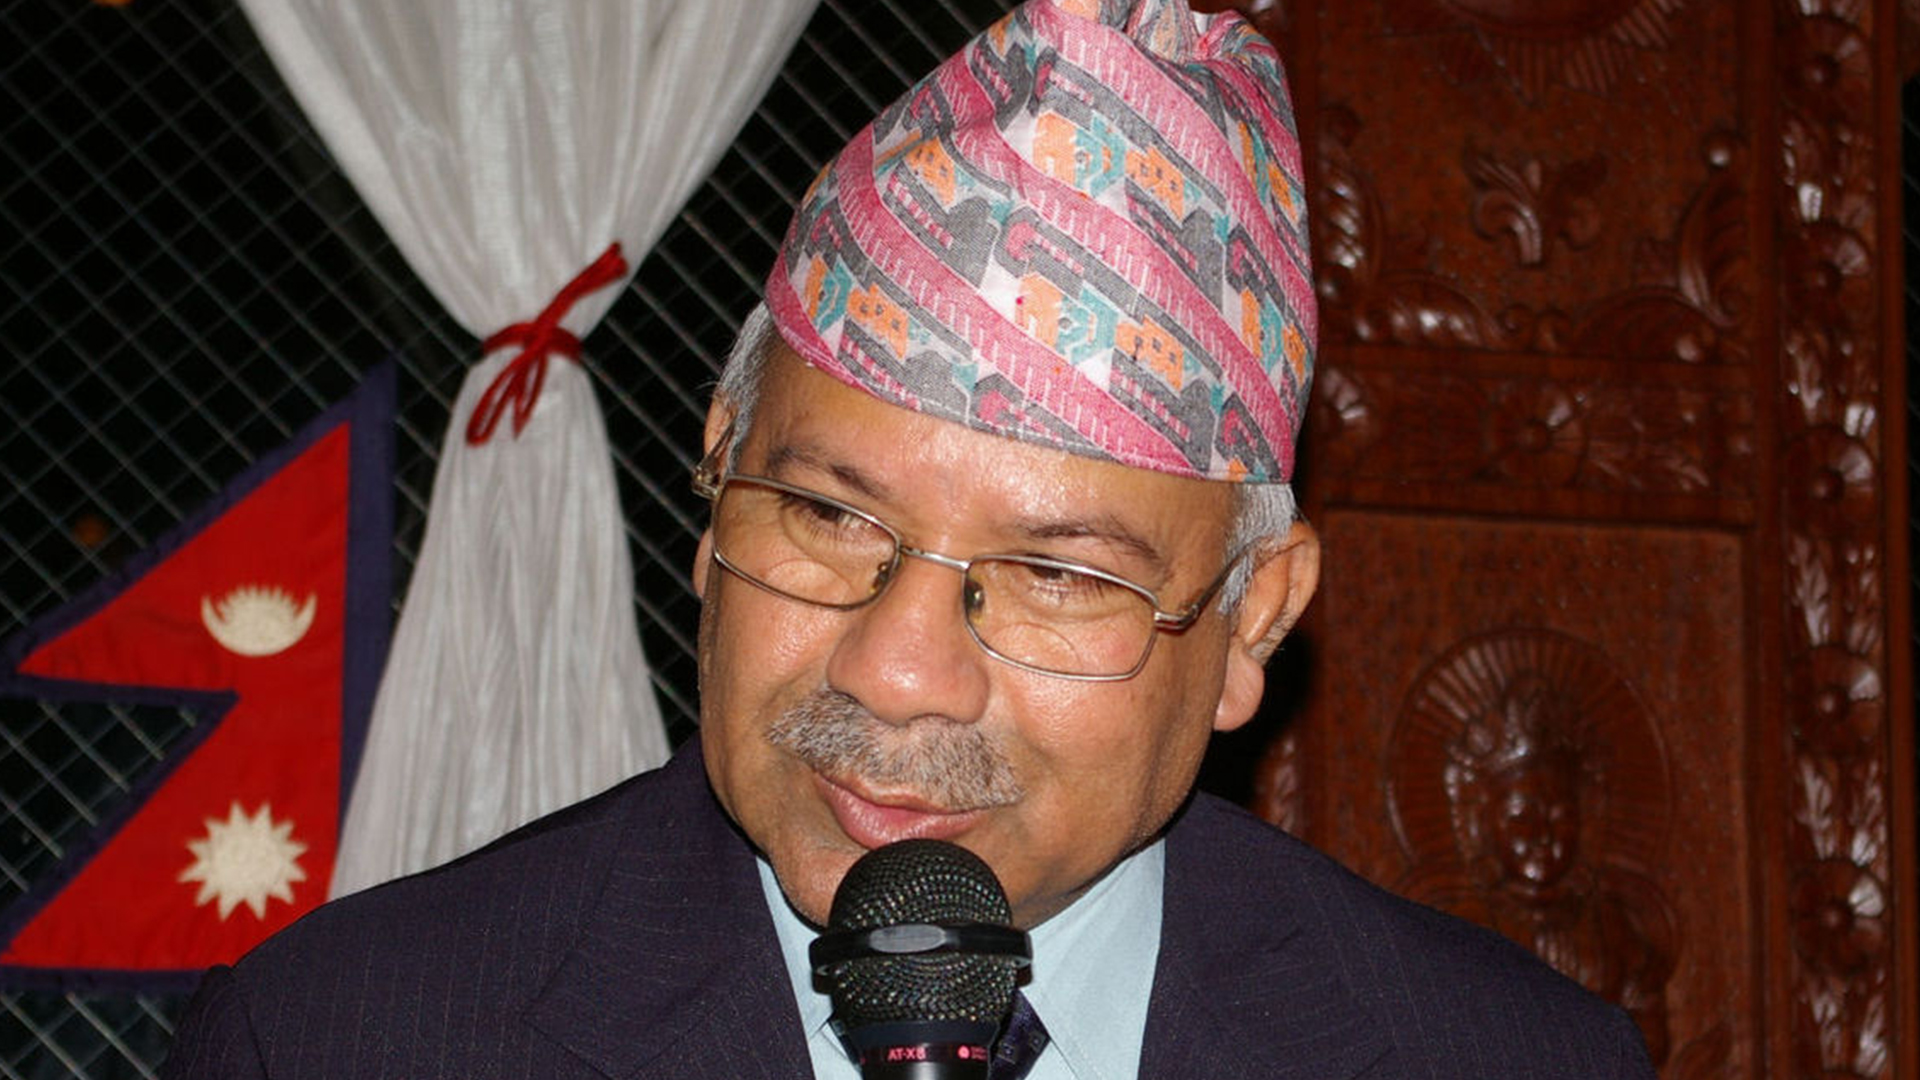 Madhav Nepal's side decides to hold national meeting